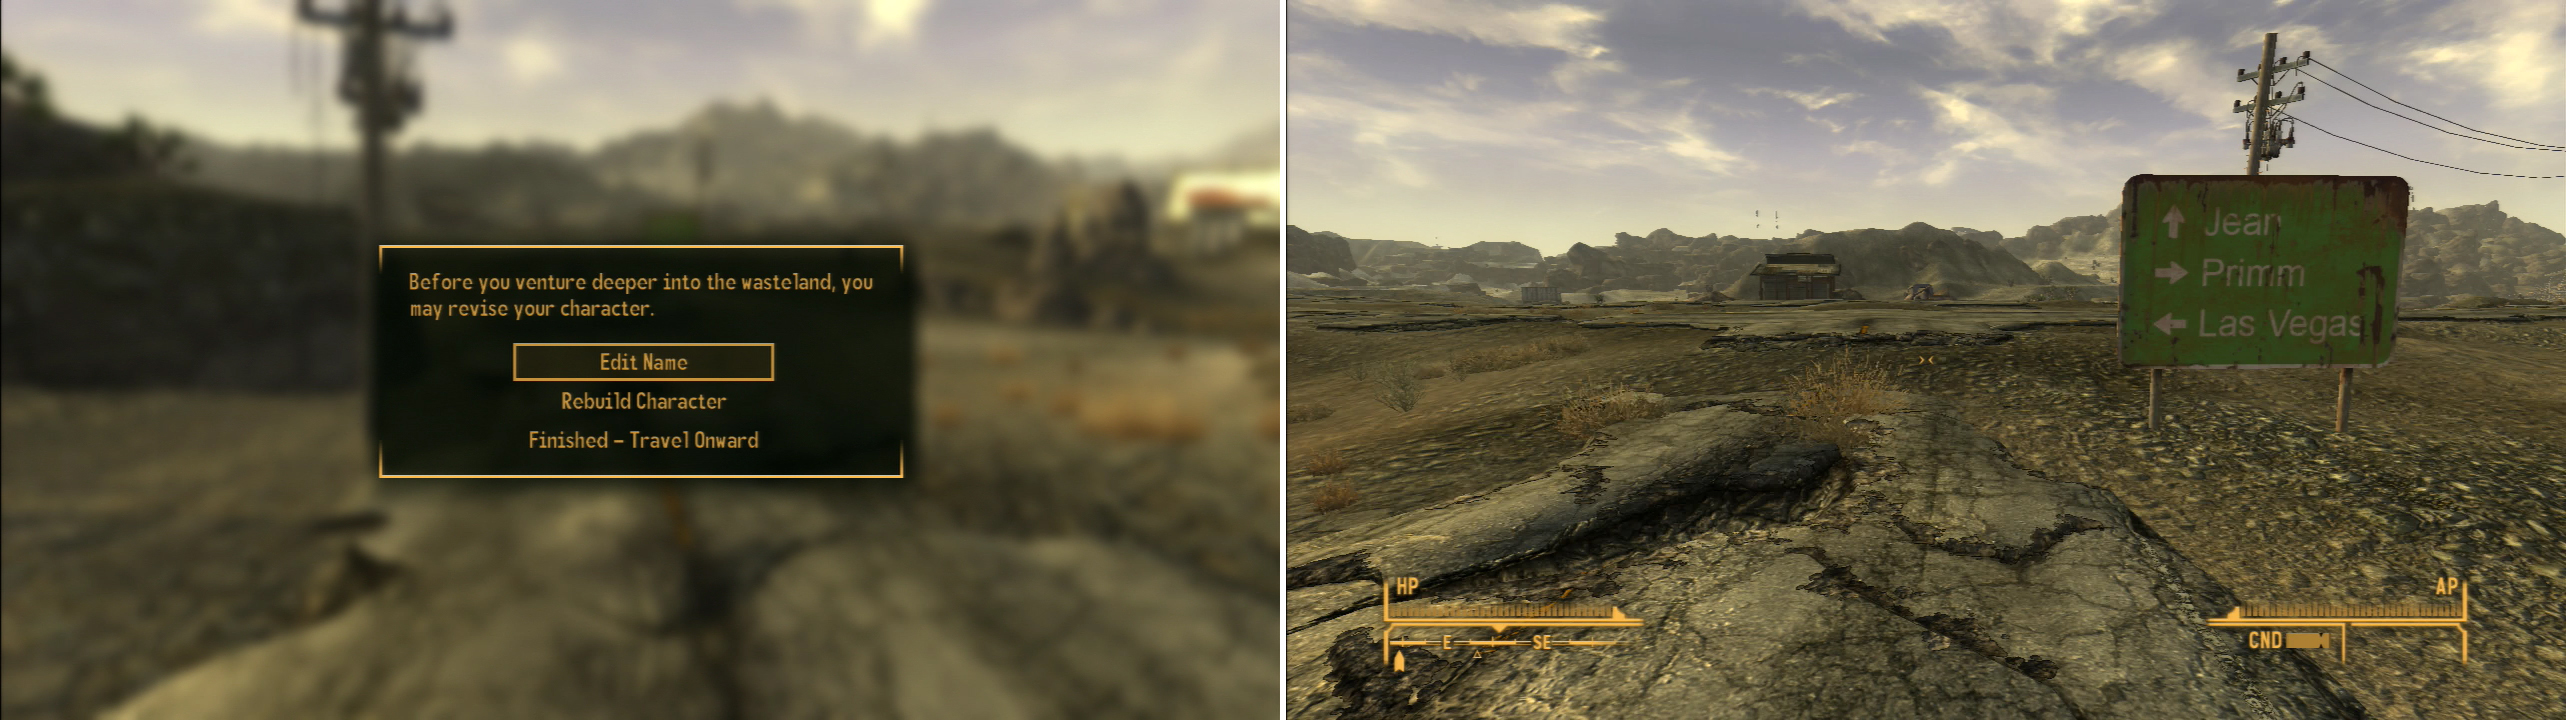 As you’re about to leave Goodsprings, you’ll get one final chance to modify your character (left). Once done, follow the road out of Goodsprings to reach the highway (right).